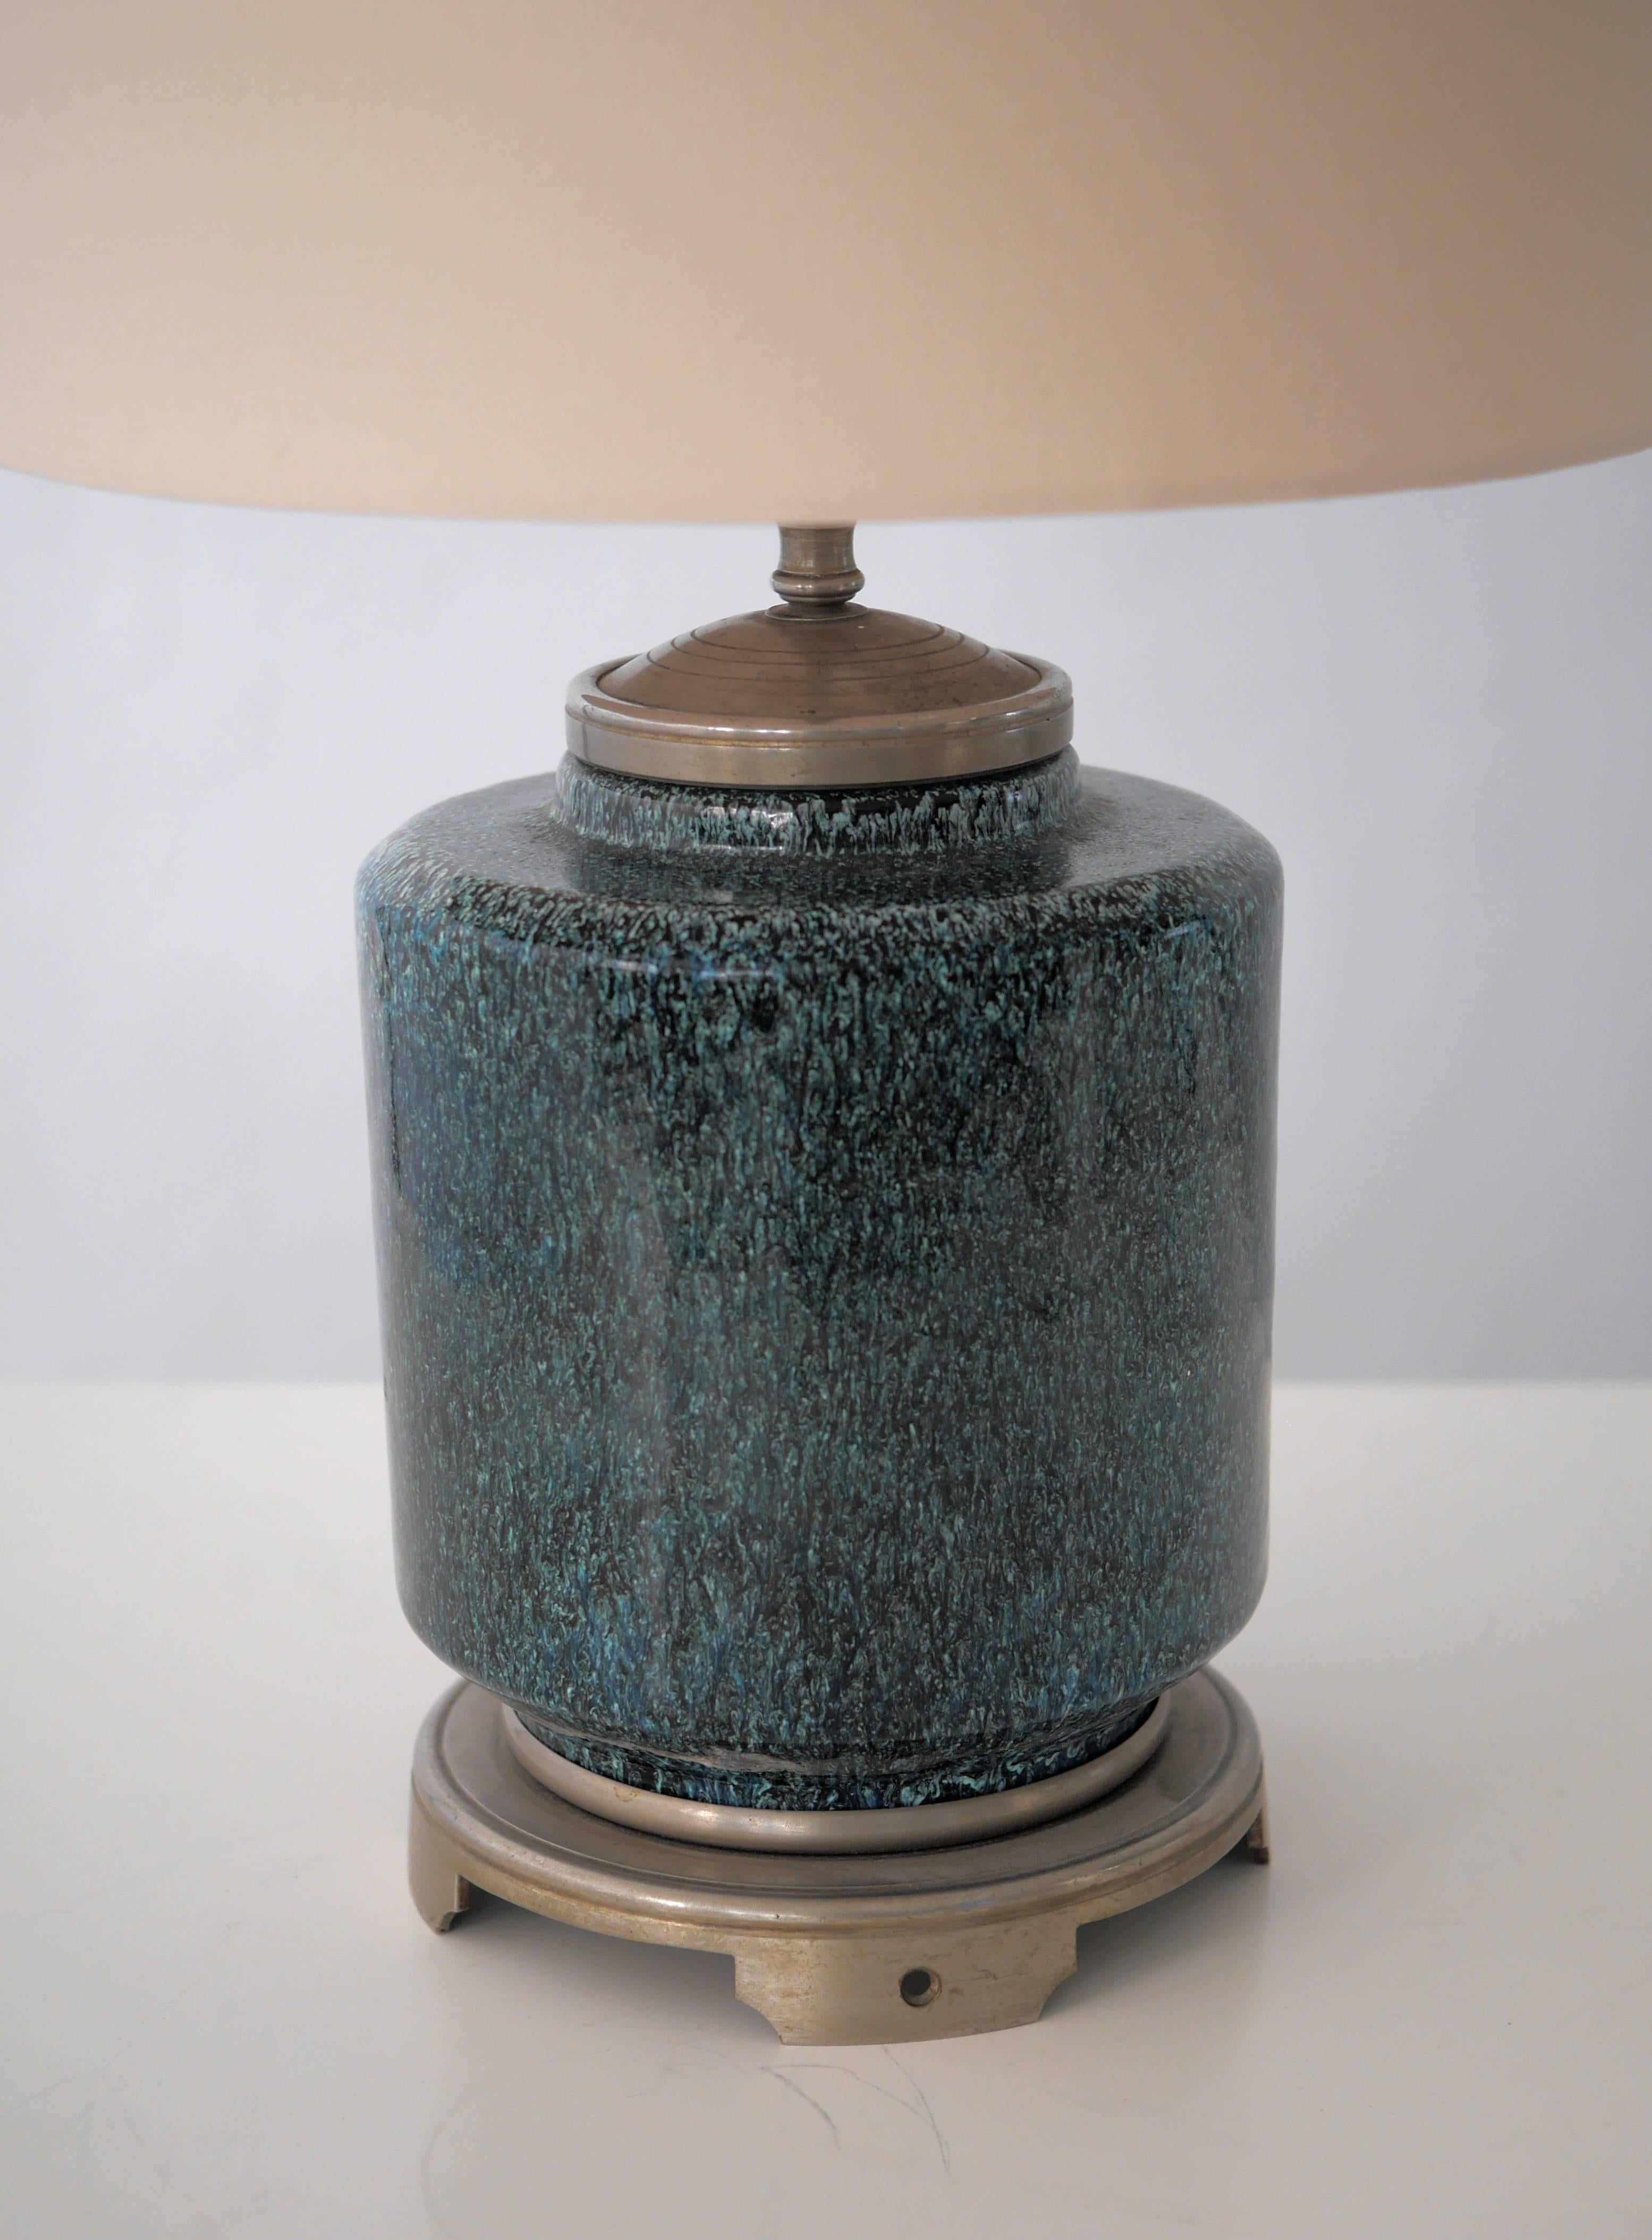 French ceramic table lamp. Marked made in France, new linen shade.